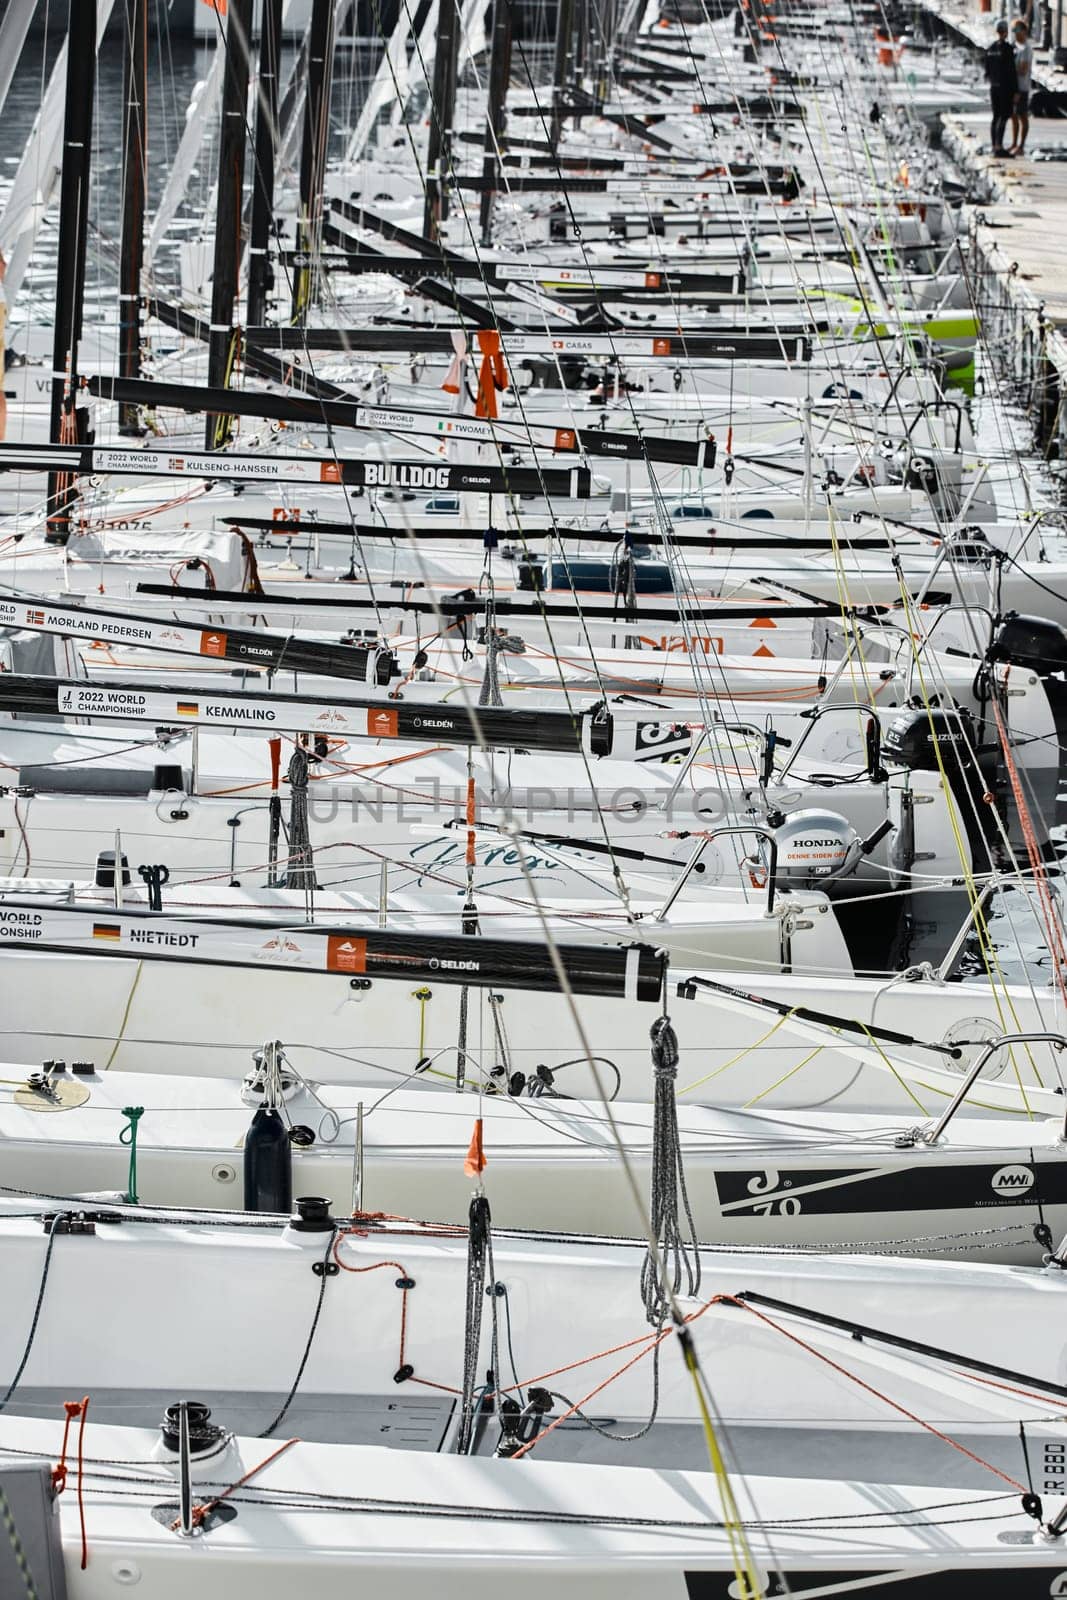 Monaco, Monte-Carlo, 18 October 2022: many sailing boats of the World Championship of J70 class participants stand in a row waiting for the wind for the stage of the sailing race by vladimirdrozdin